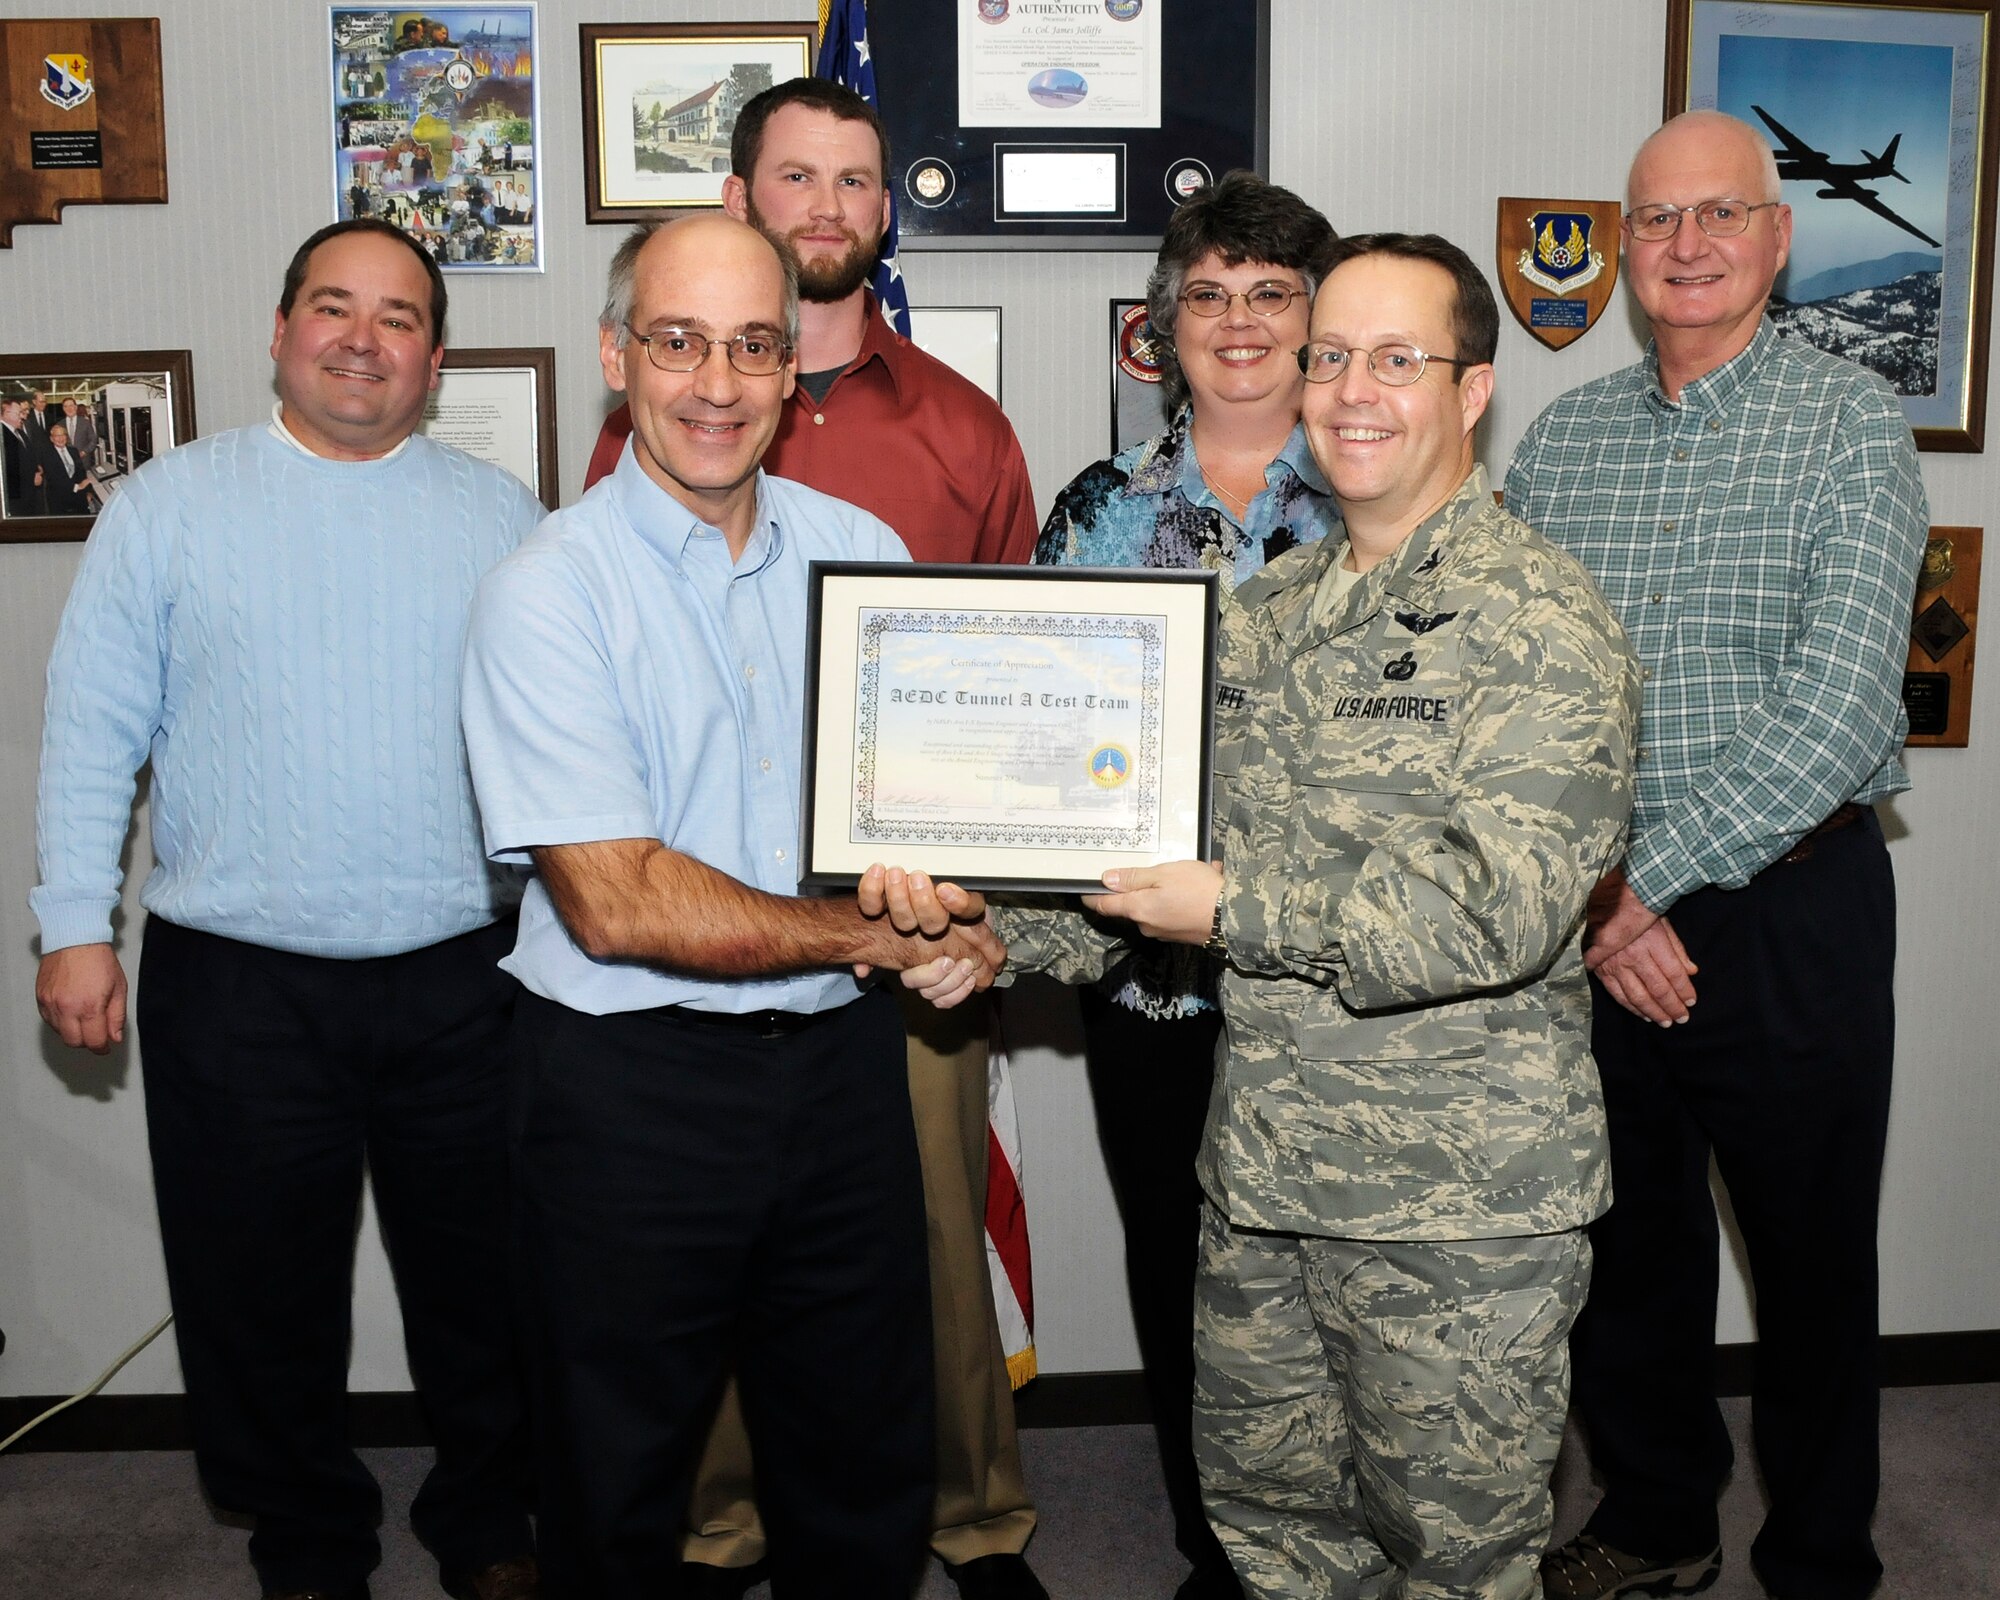 Paul Jalbert, Aerospace Testing Alliance (ATA) project manager, and Col. James Jolliffe, 704th Test Group commander, hold a certificate of appreciation that was presented by NASA for the work done on the NASA Ares Stage Separation Test in VKF Tunnel A in July 2008. According to Jalbert, this test was important to NASA because the stability and control data during the booster and upper stage separation will be used to support the Ares I-X flight later this year. Pictured from left to right: Back row, from left, Lyle Sissom, instrumentation engineer, Kevin Boyce, test operations engineer, Janet Feller, programming and data reduction and Win Phipps, AEDC Air Force project manager. ATA is the support contractor for AEDC. (Photo by Rick Goodfriend)